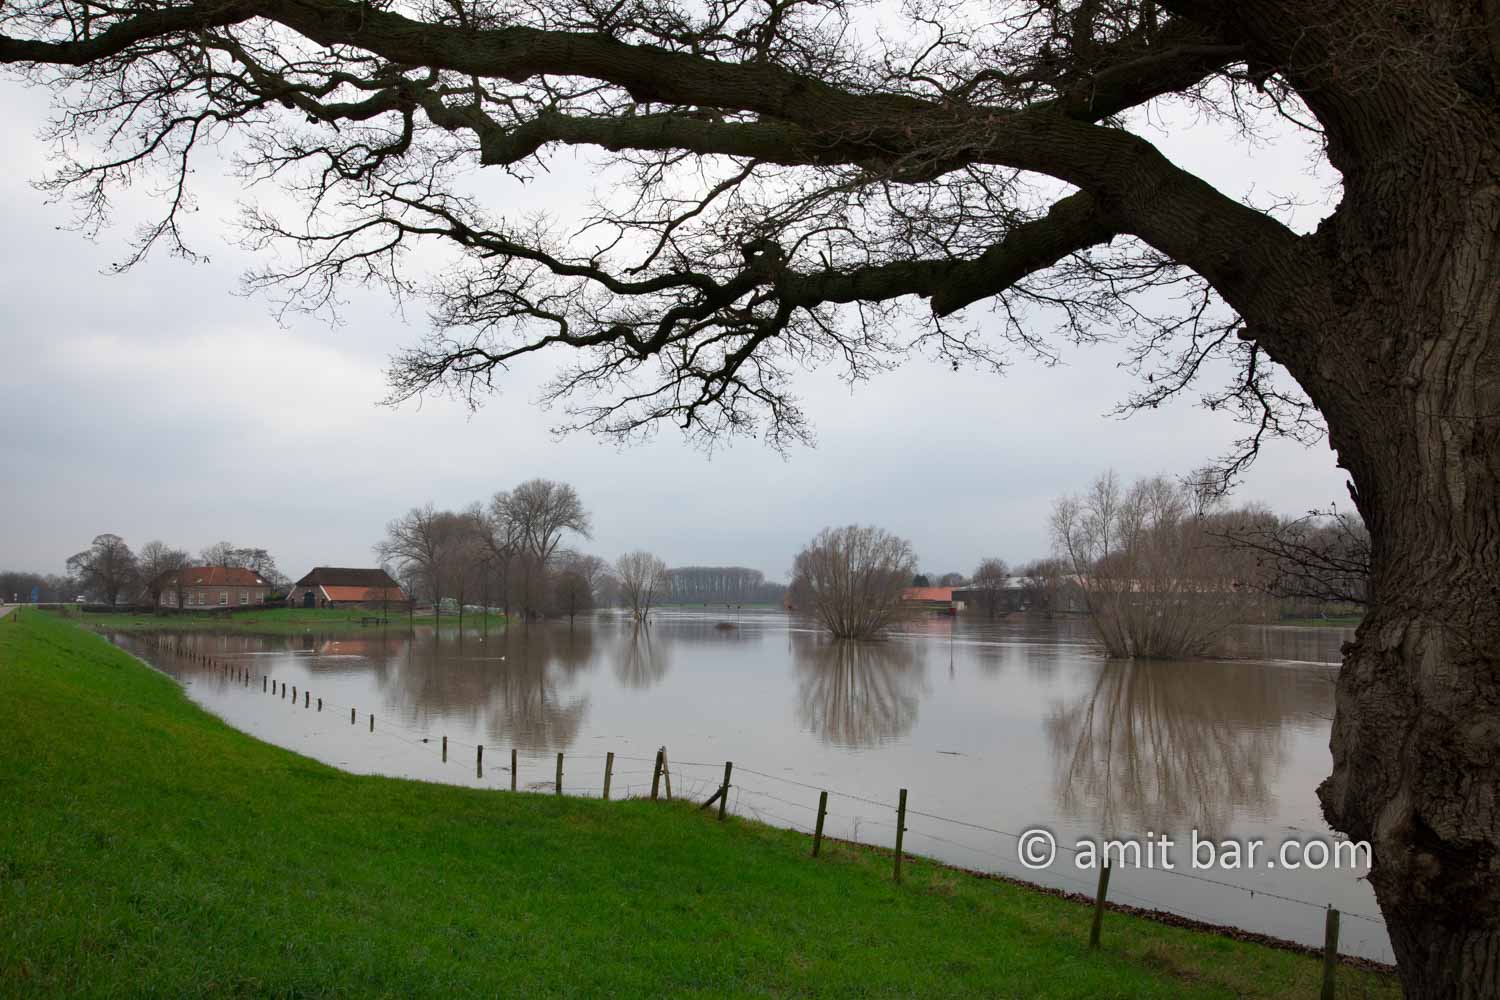 High water IJssel river V: Lots of rain in the Alps and Germany leads plenty of water to the rivers in The Netherlands. like the IJssel by Doesburg